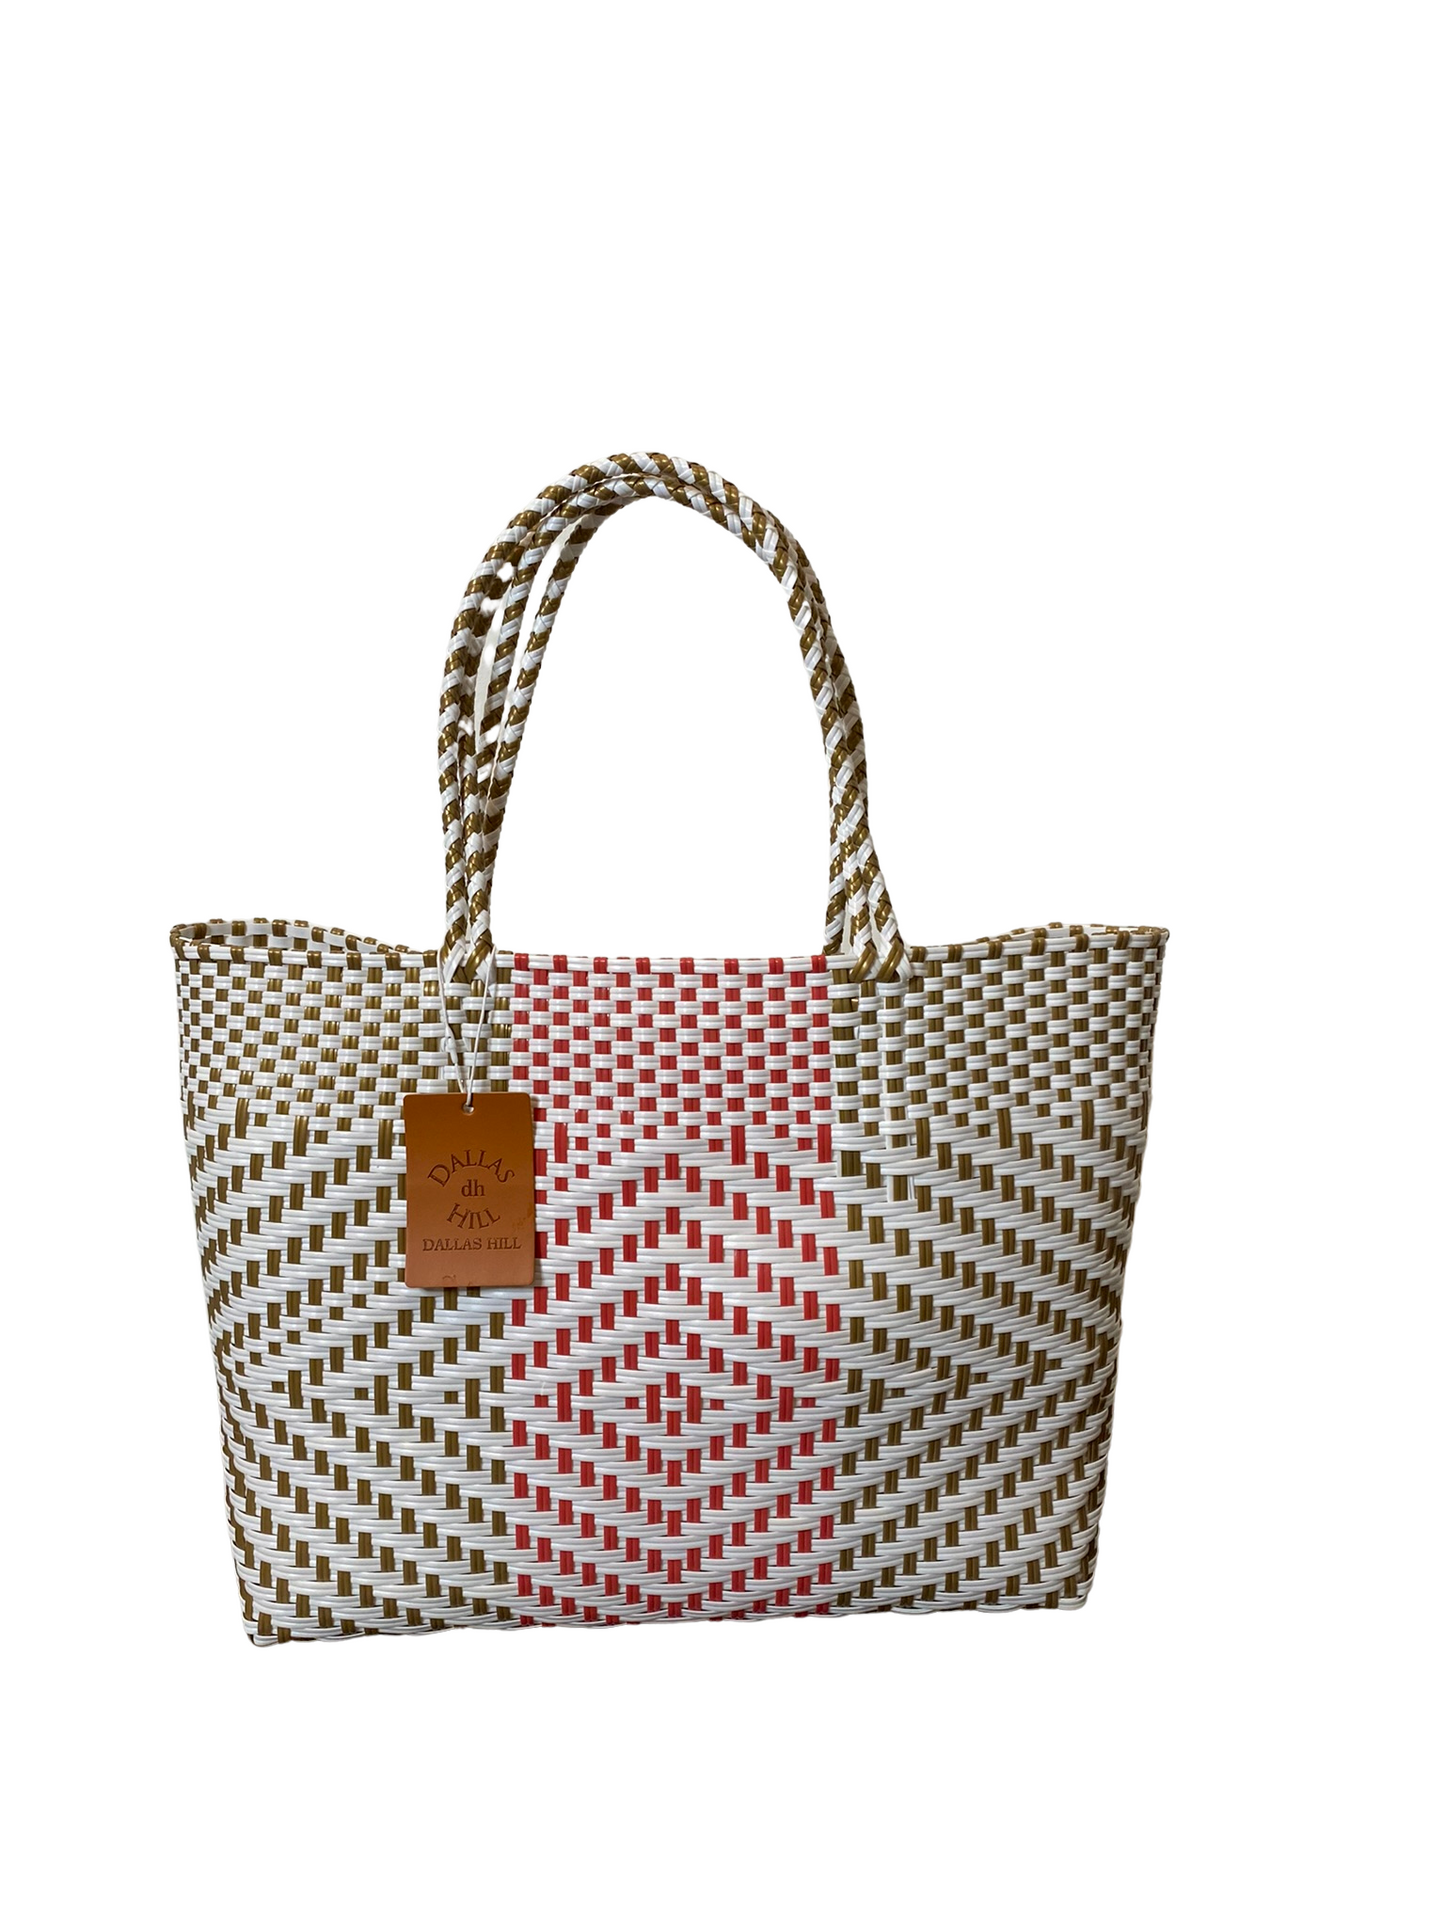 Woven Super Tote, Handwoven Recycled Plastic Tote, Woven Bag, Beach Bag, Summer Bag Pink White & Gold